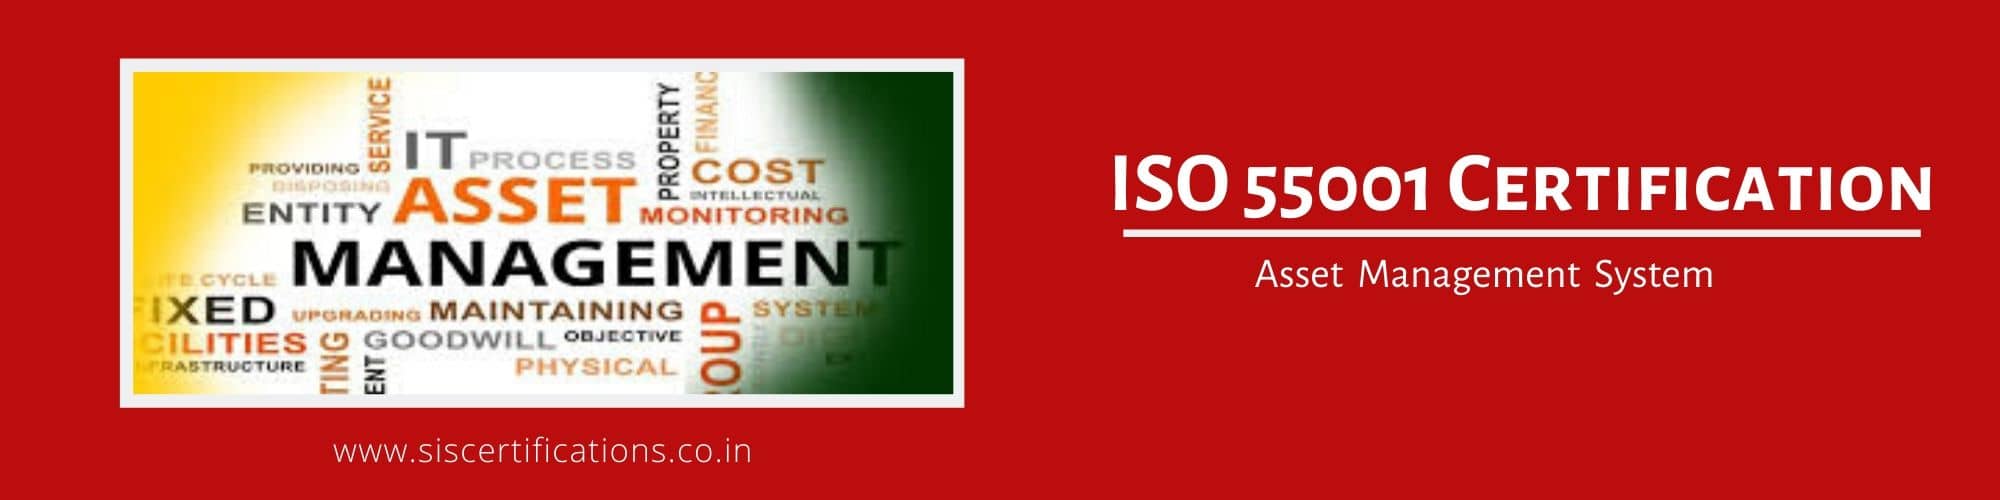 ISO 55001 Certification , ISO 55001 Certification